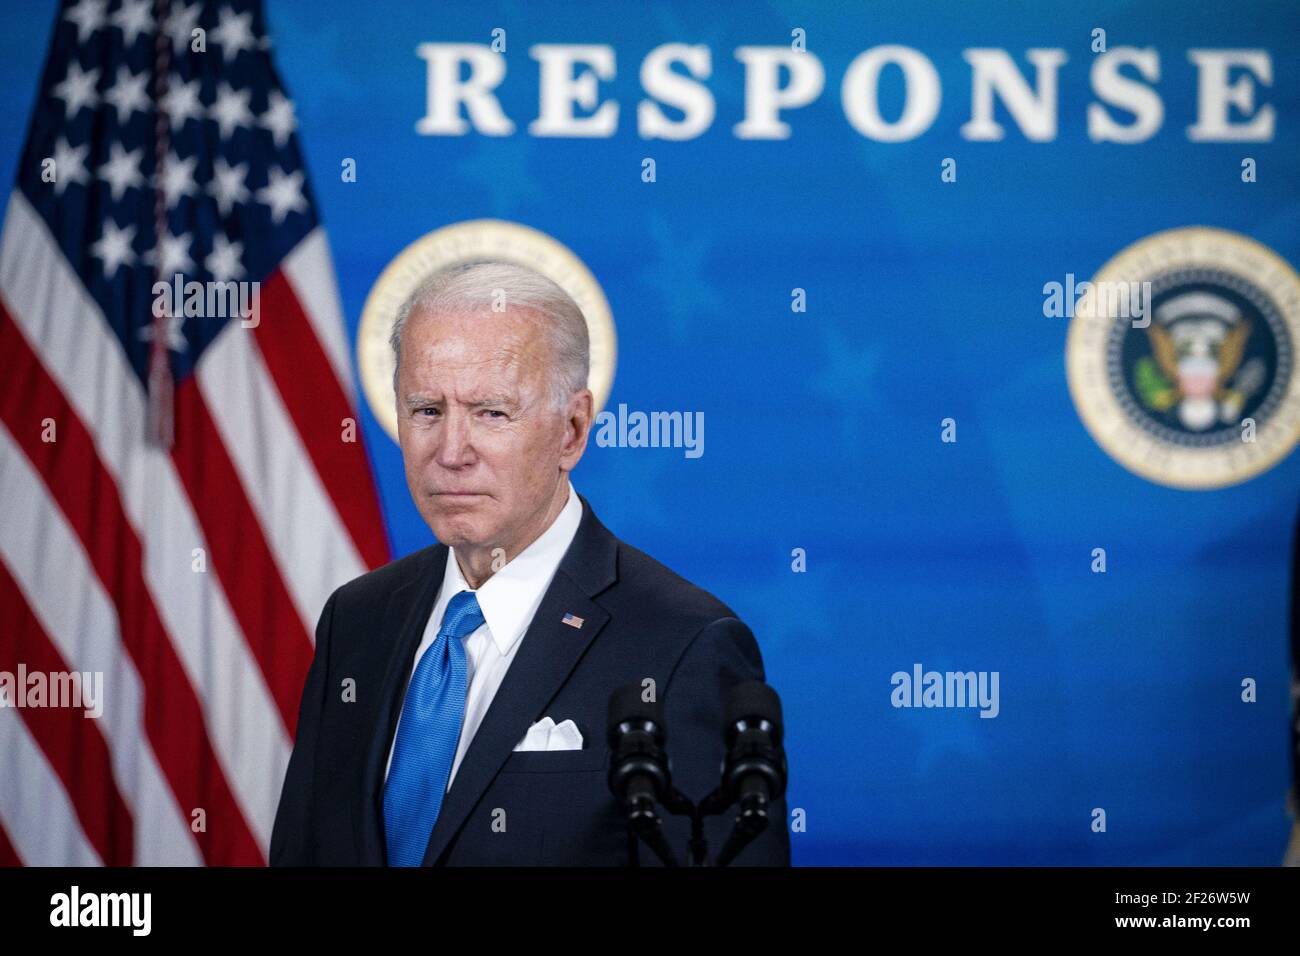 Washington, United States. 10th Mar, 2021. U.S. President Joe Biden speaks during an event in the Eisenhower Executive Office Building in Washington, DC on Wednesday, March 10, 2021. Biden will double the U.S. order of Johnson & Johnson's one-shot vaccine, seeking another 100 million doses, bringing bringing the country's total vaccine supply to enough for 500 million people. Photo by Al Drago/UPI Credit: UPI/Alamy Live News Stock Photo